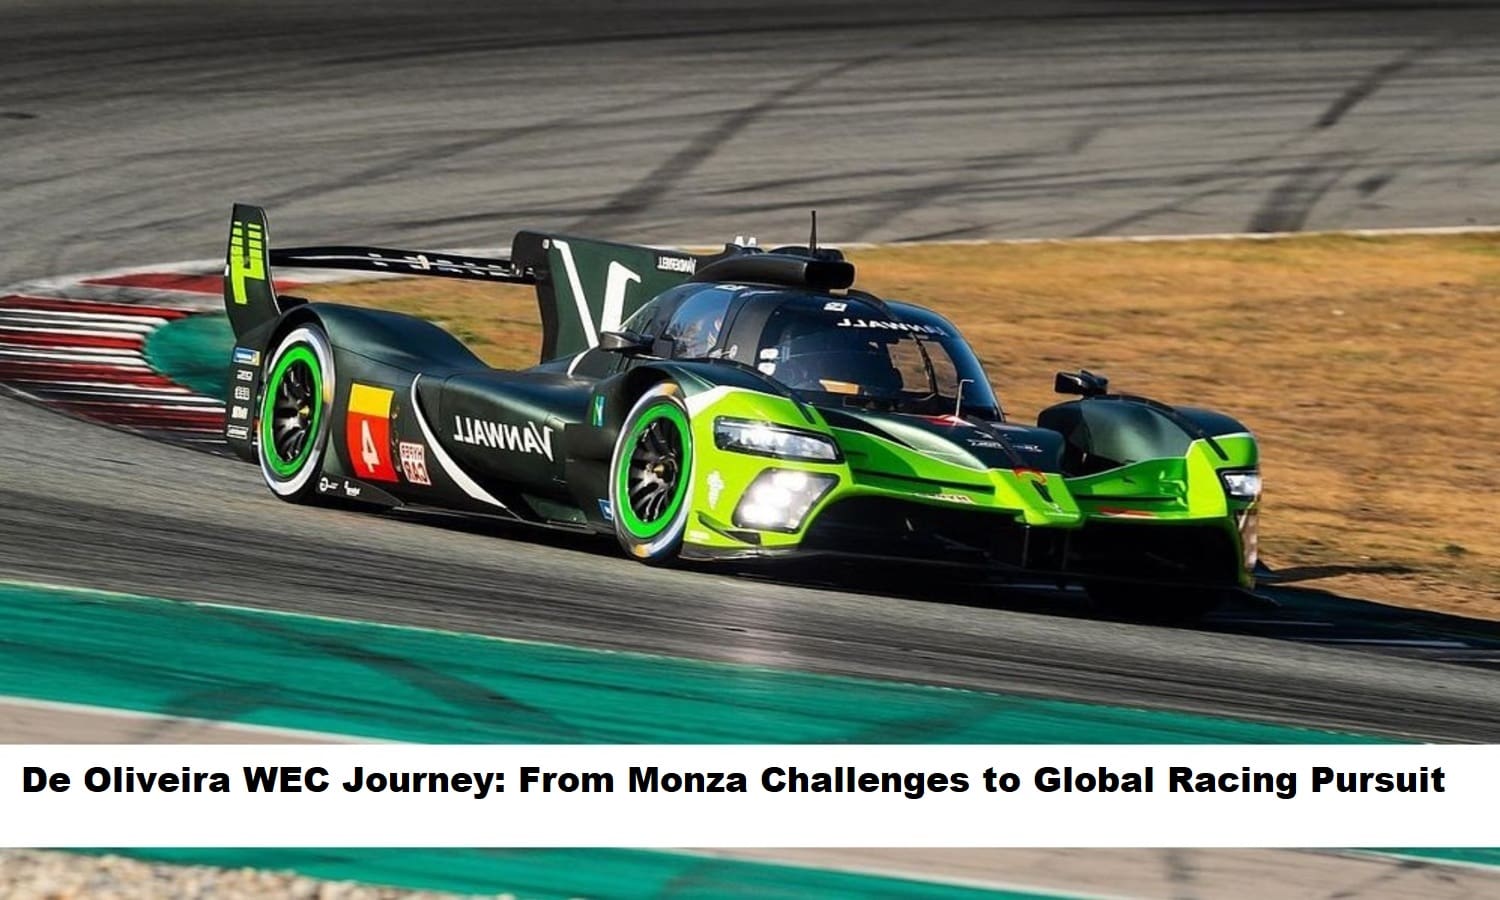 de-oliveira-wec-journey-from-monza-challenges-to-global-racing-pursui